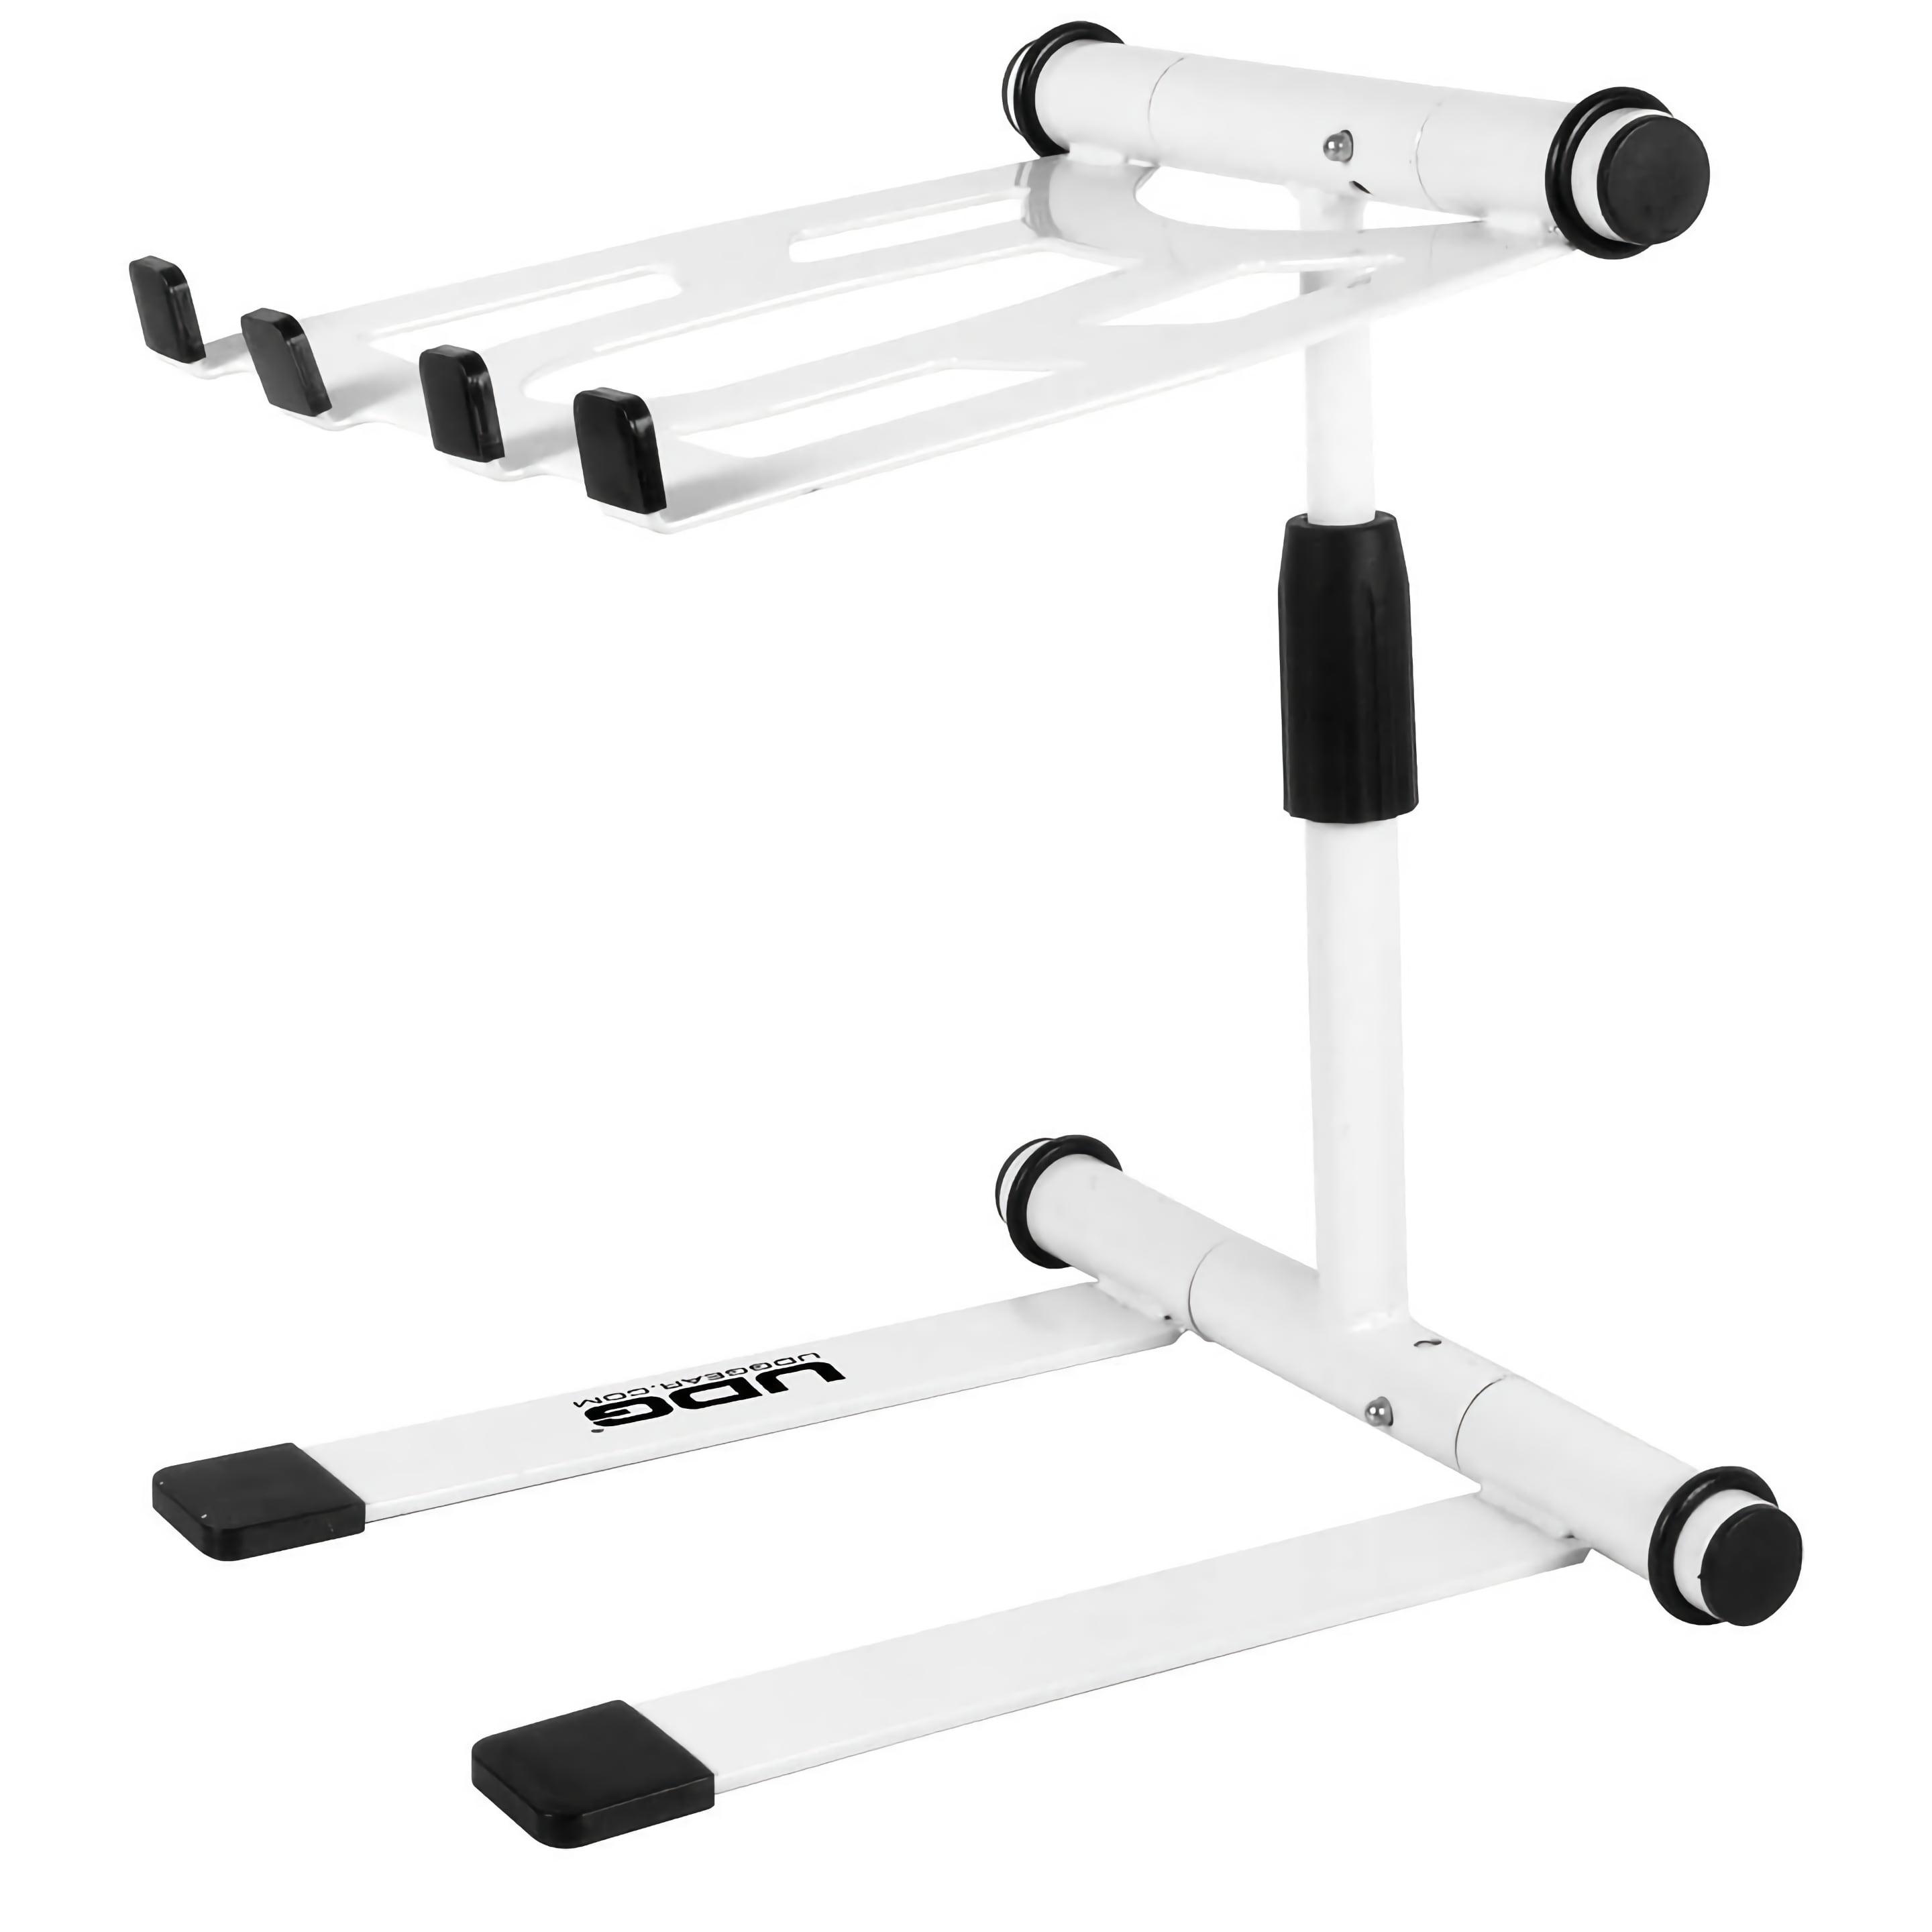 UDG Ultimate Height Adjustable Laptop Stand White 7